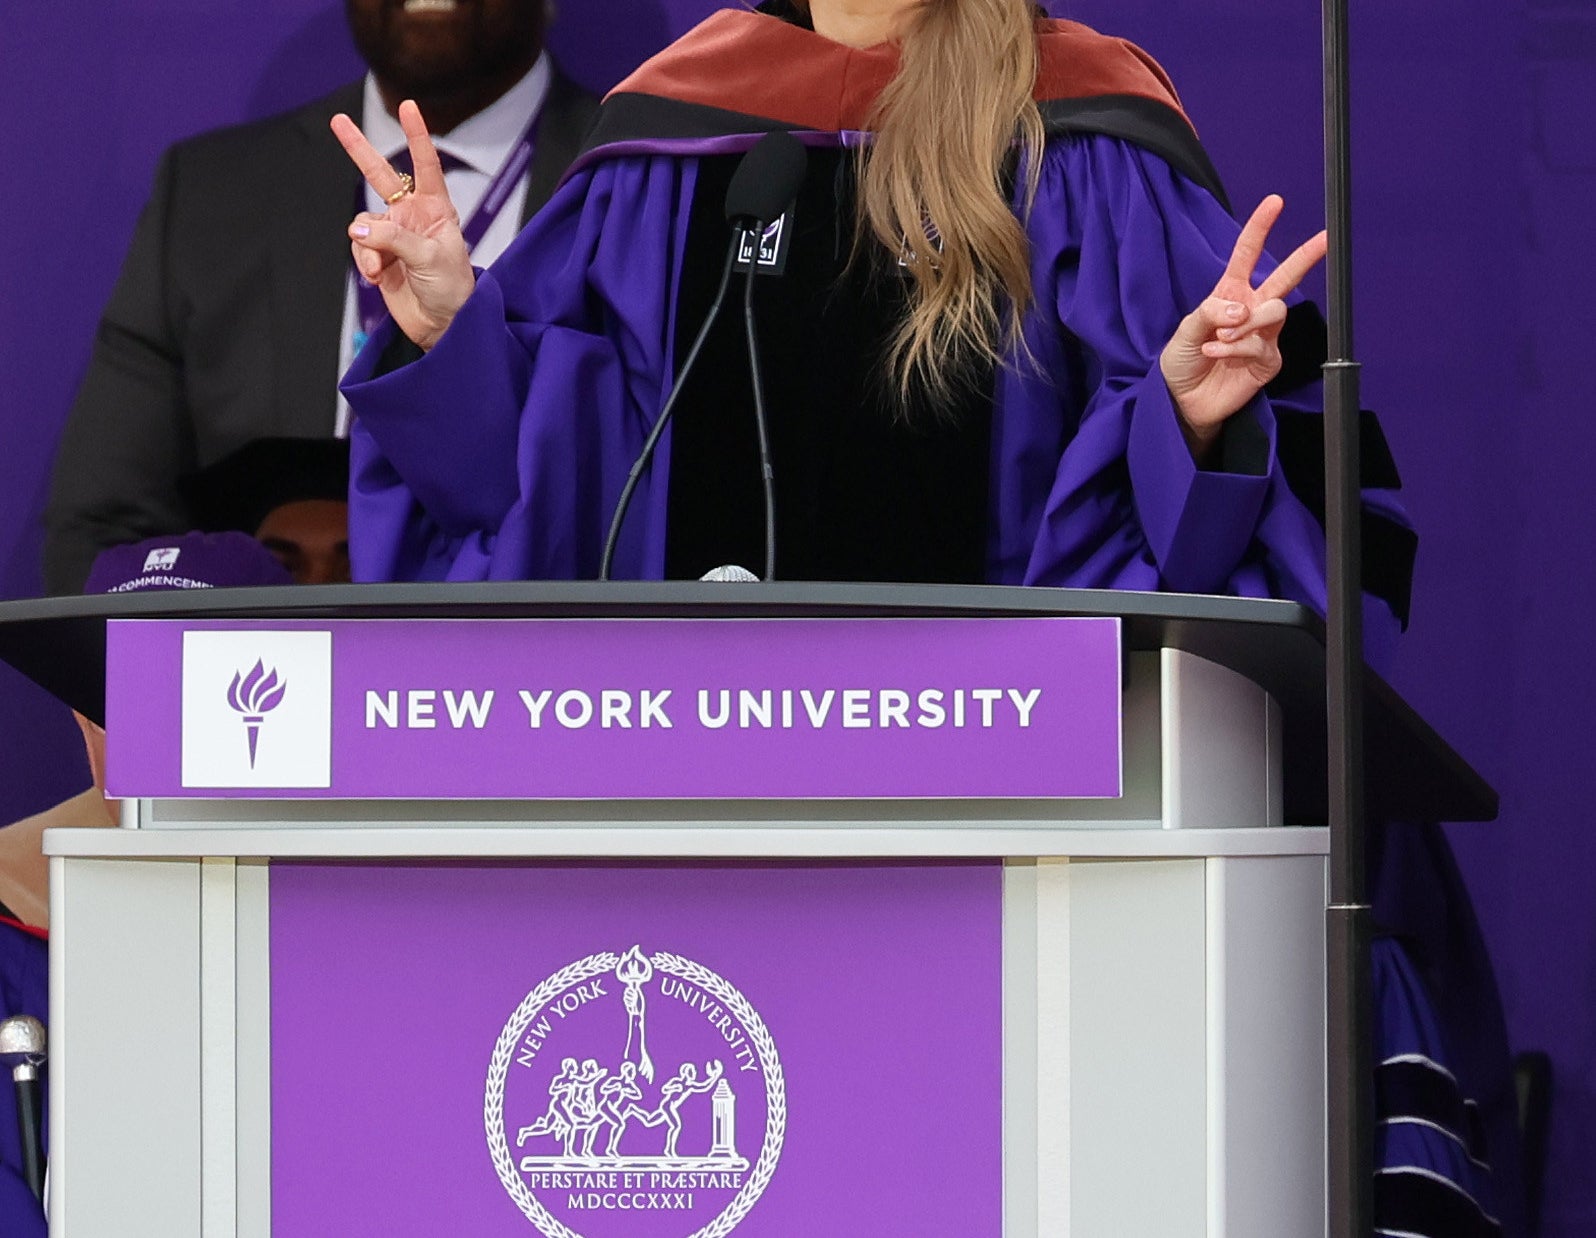 Taylor stands on stage in a cap and gown